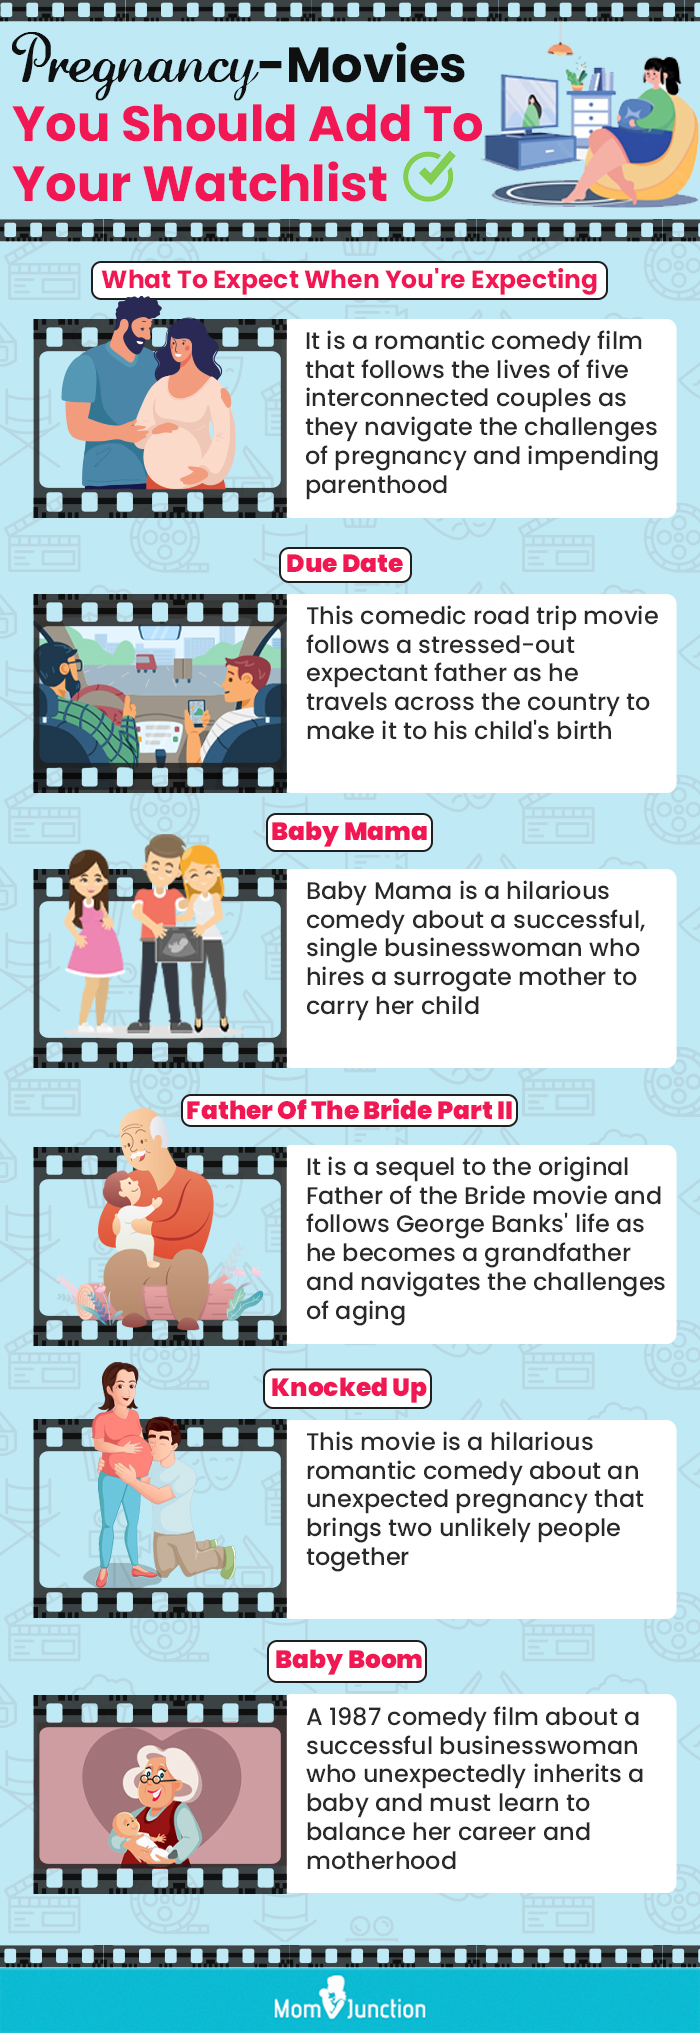 pregnancy movies you should add to your watchlist (infographic)